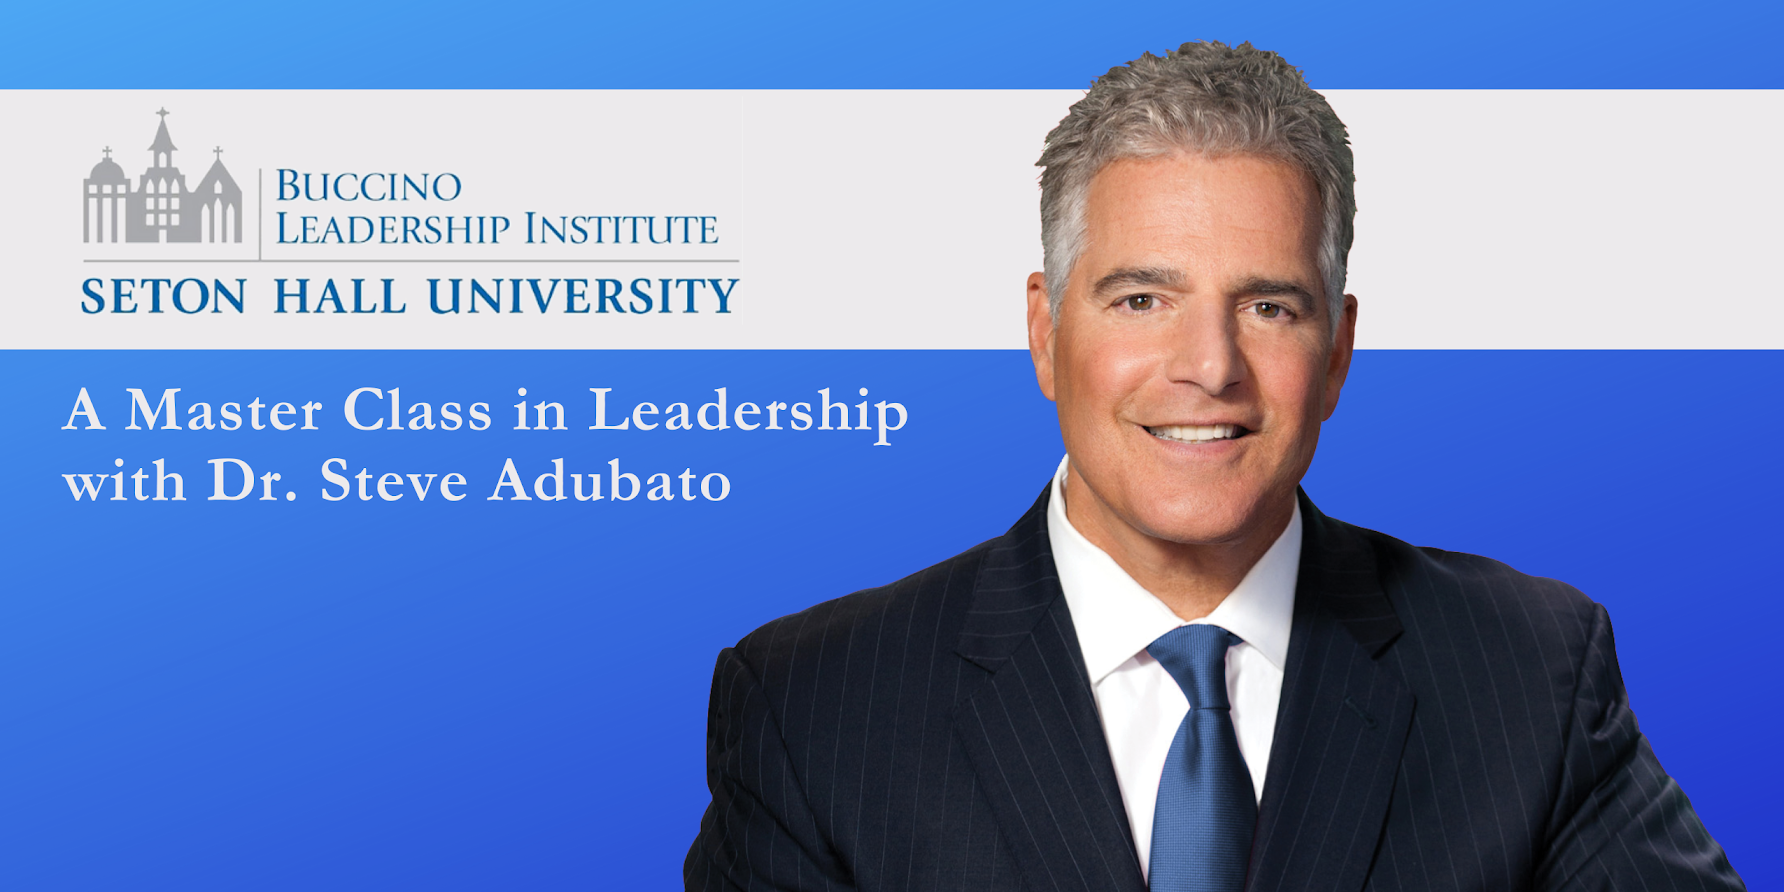 A Master Class in Leadership with Dr. Steve Adubato